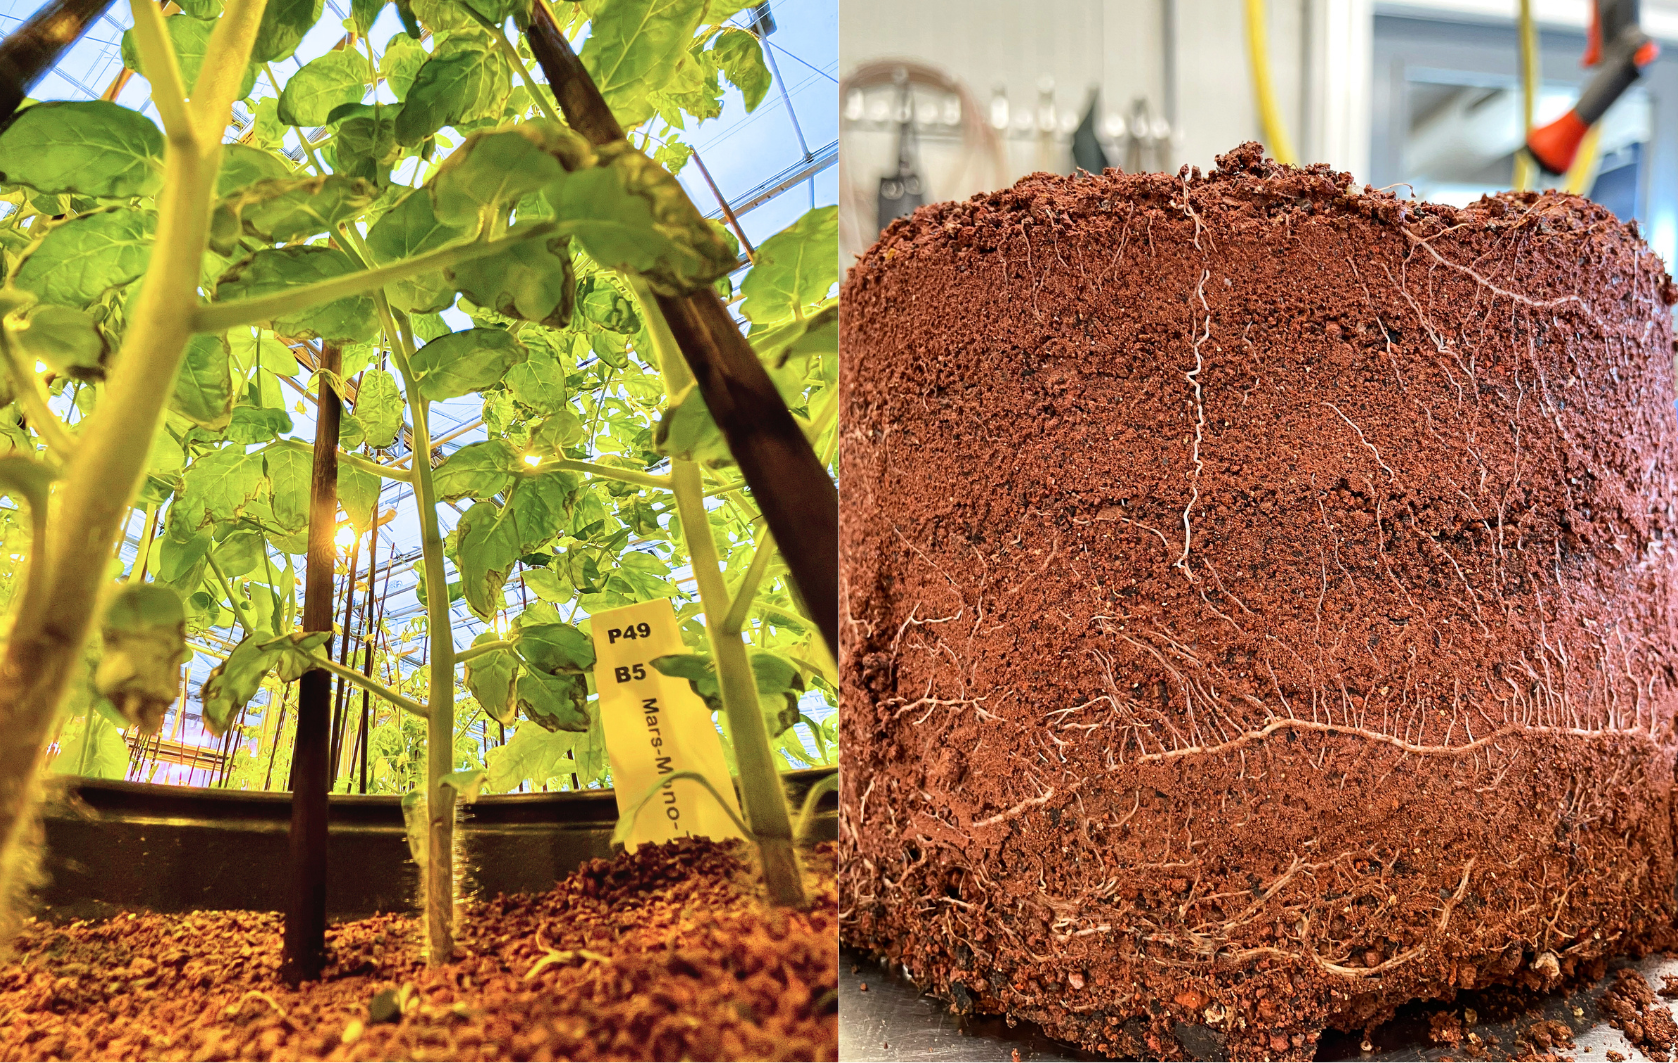 a close-up of tomatoes sprouting up from reddish brown soil growing (left). simulated Martian regolith with a root system visible in the reddish brown soil